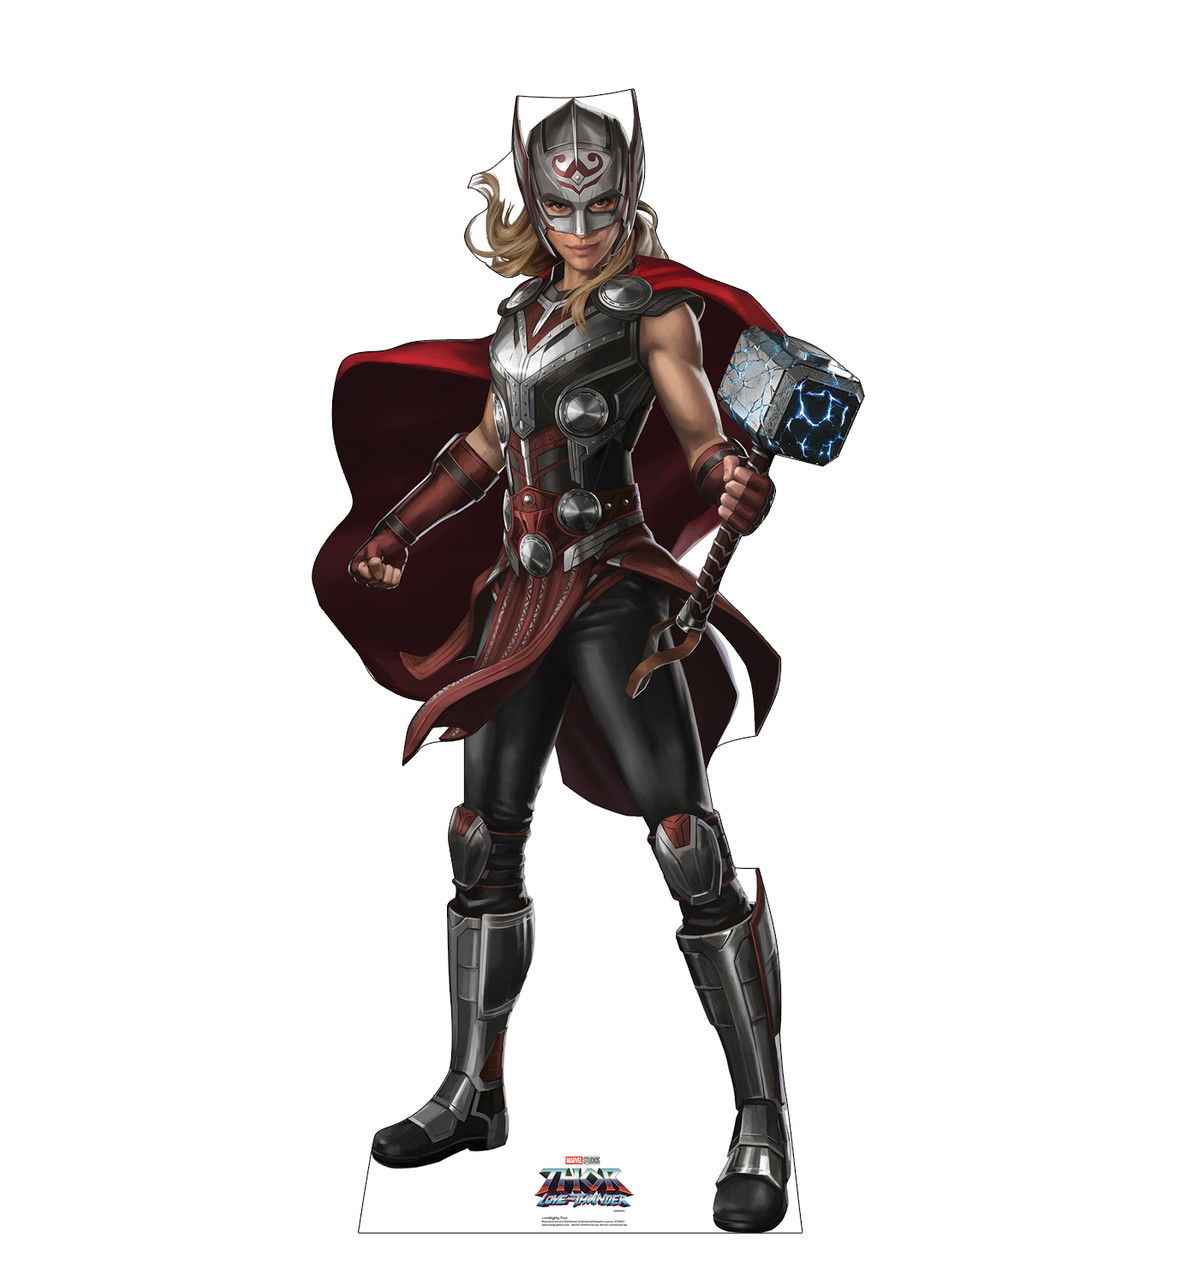 Life-size cardboard standee of Mighty Thor from Marvel's movie Thor Love and Thunder.